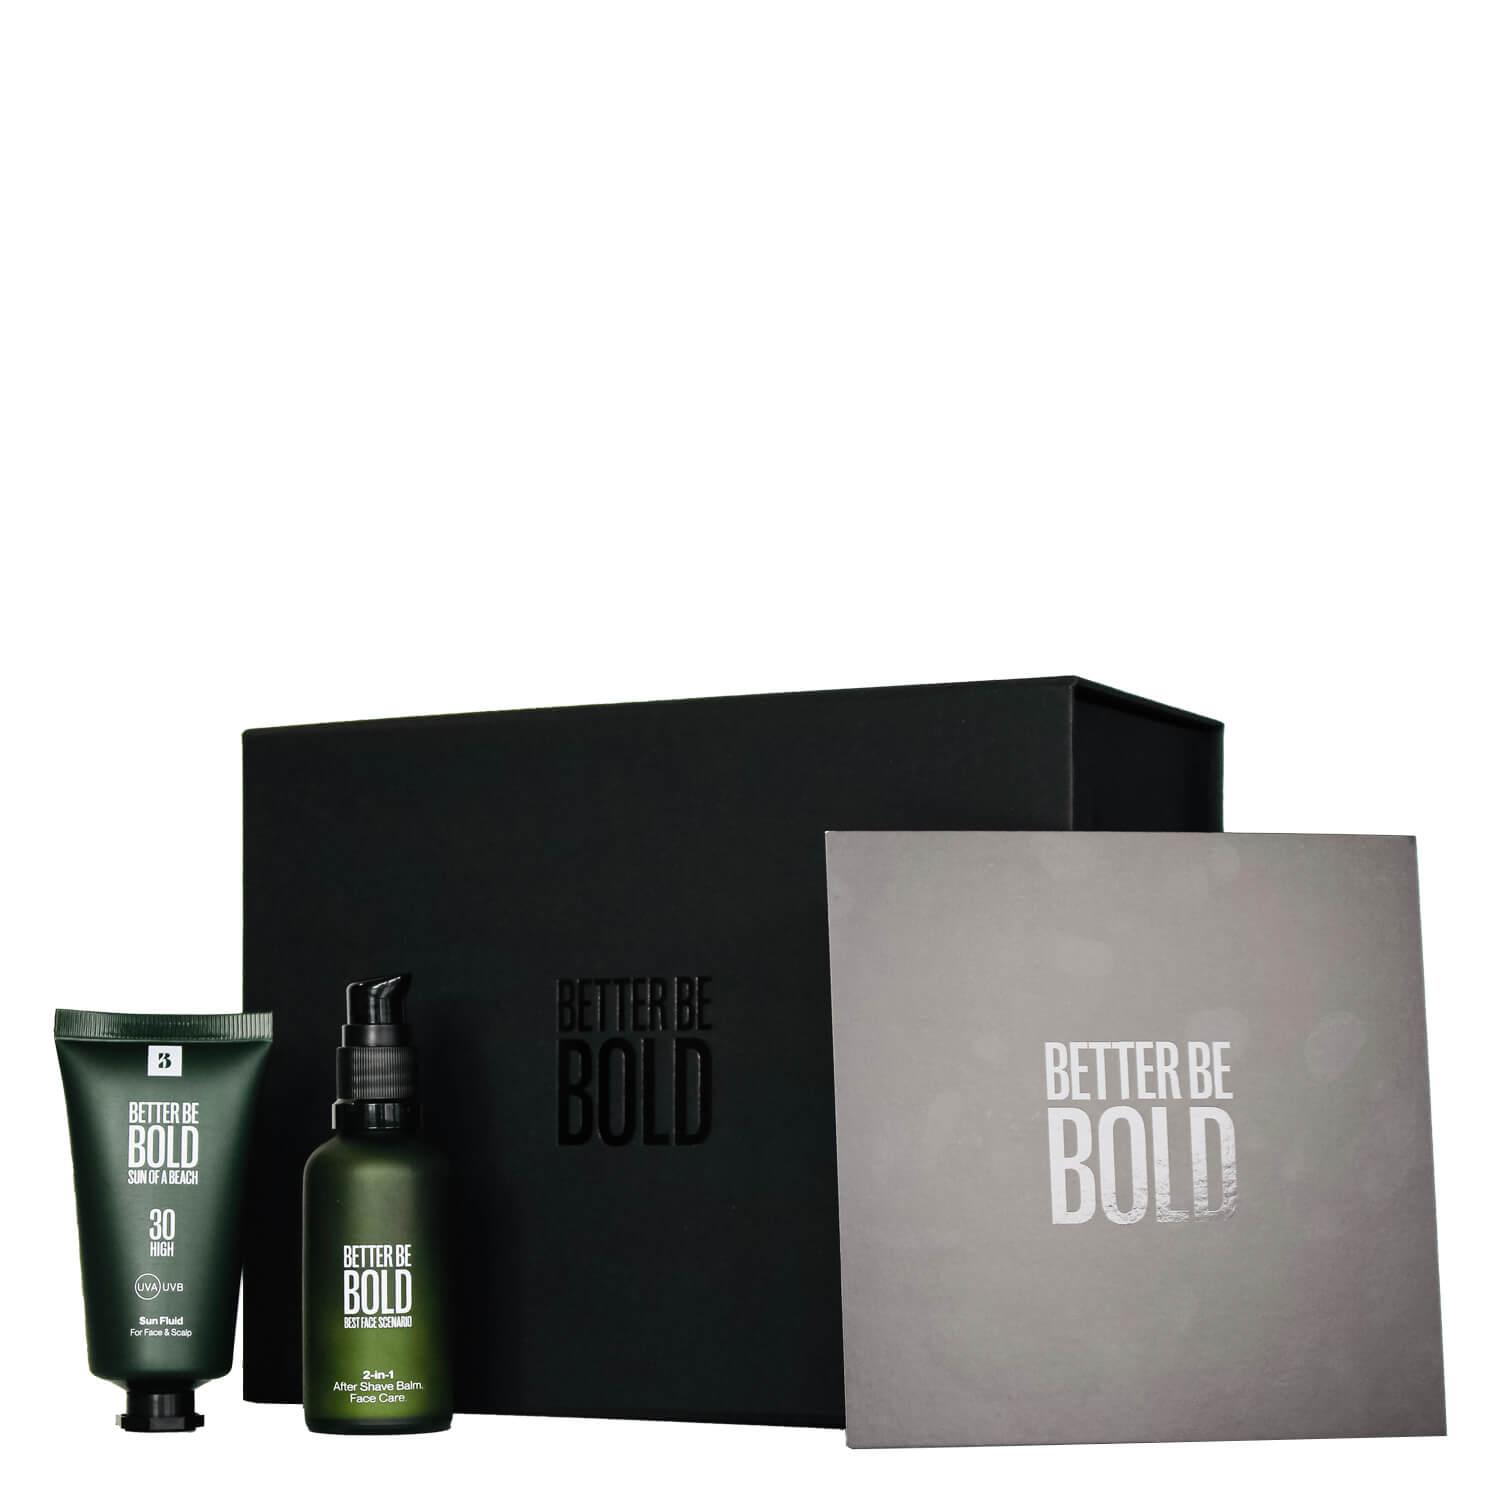 BETTER BE BOLD - Gift box for happy men with UV protection